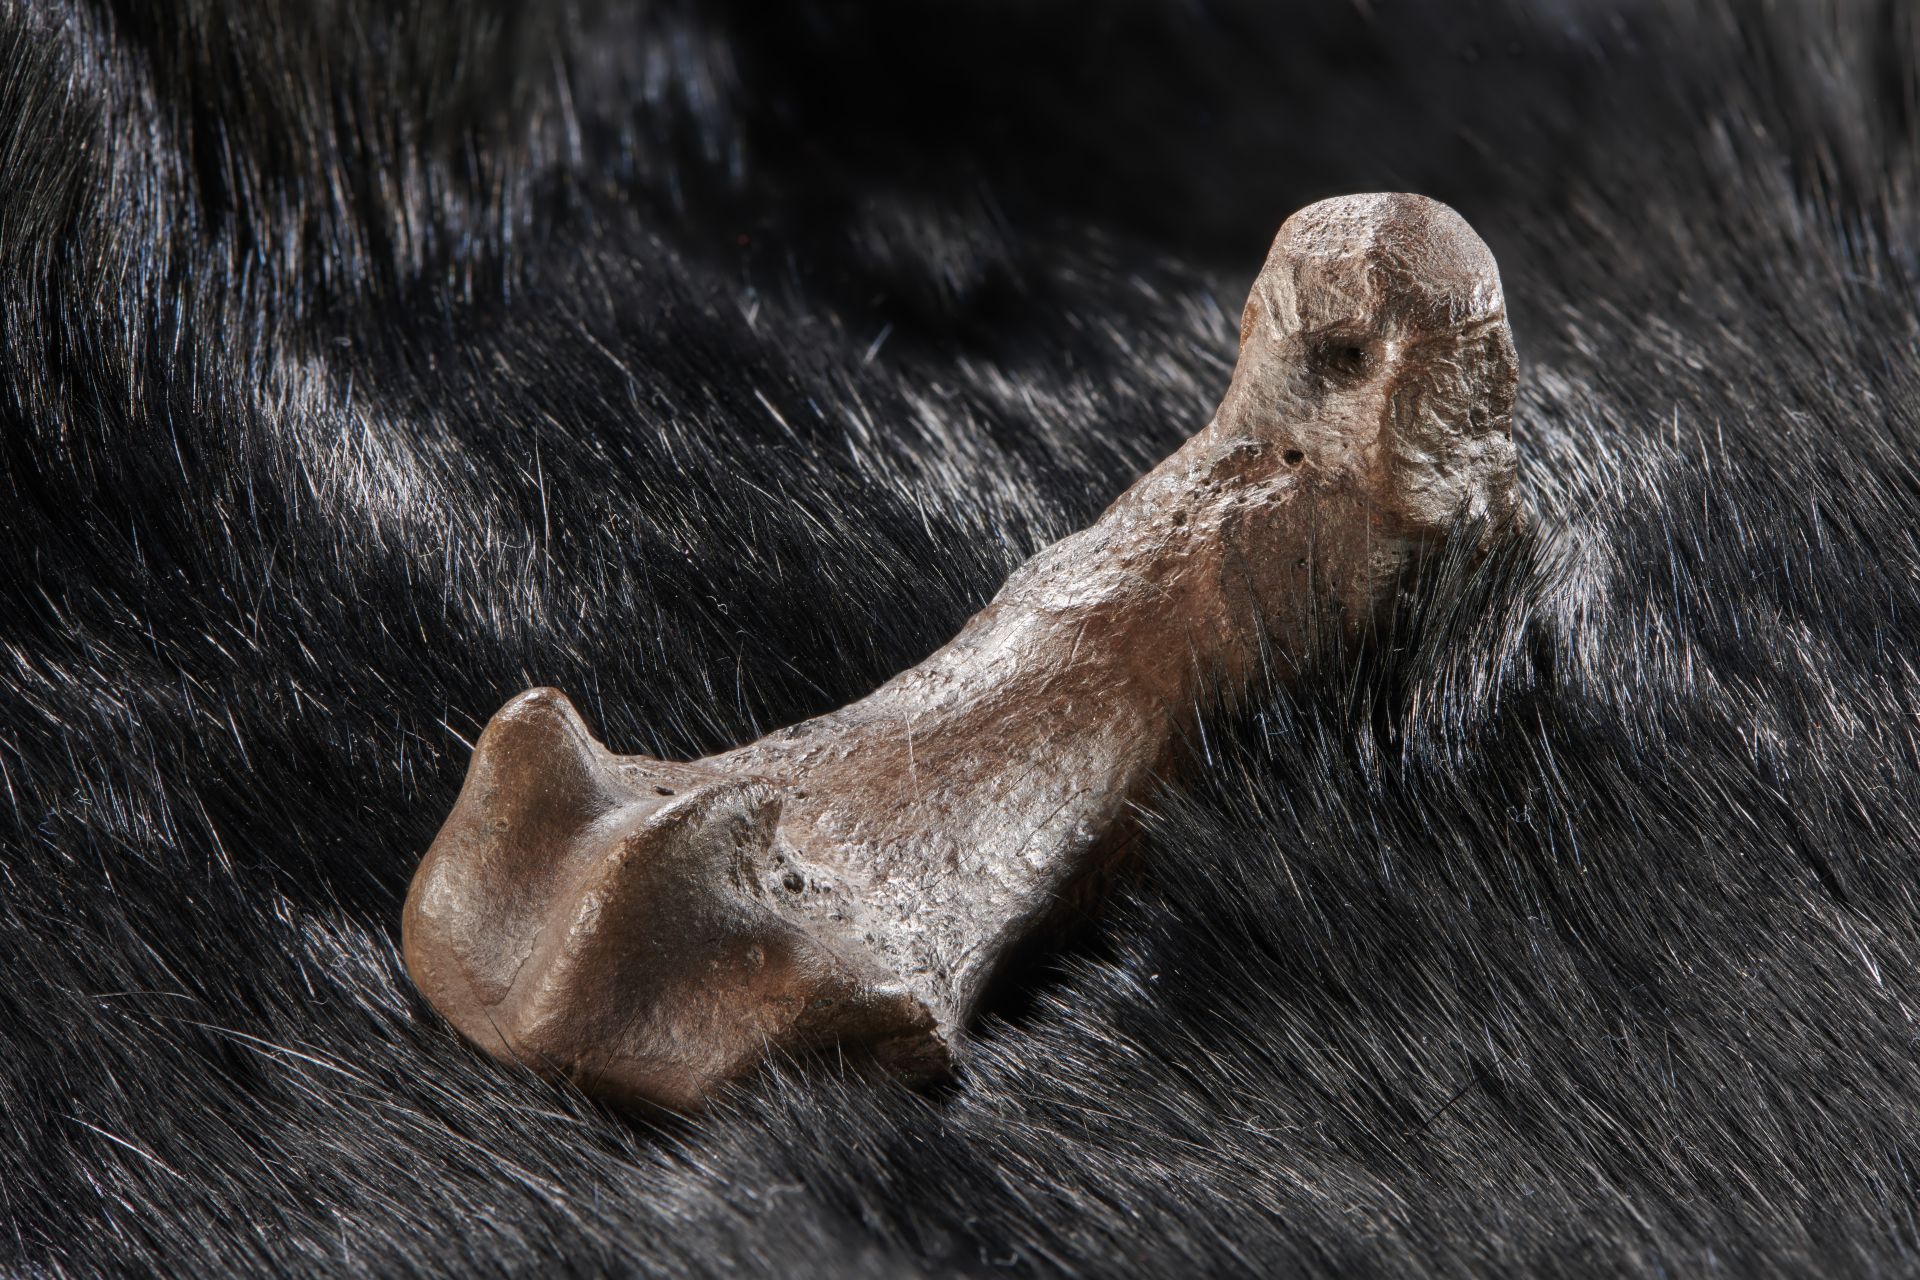 Humans have been using bear skins for at least 300,000 years